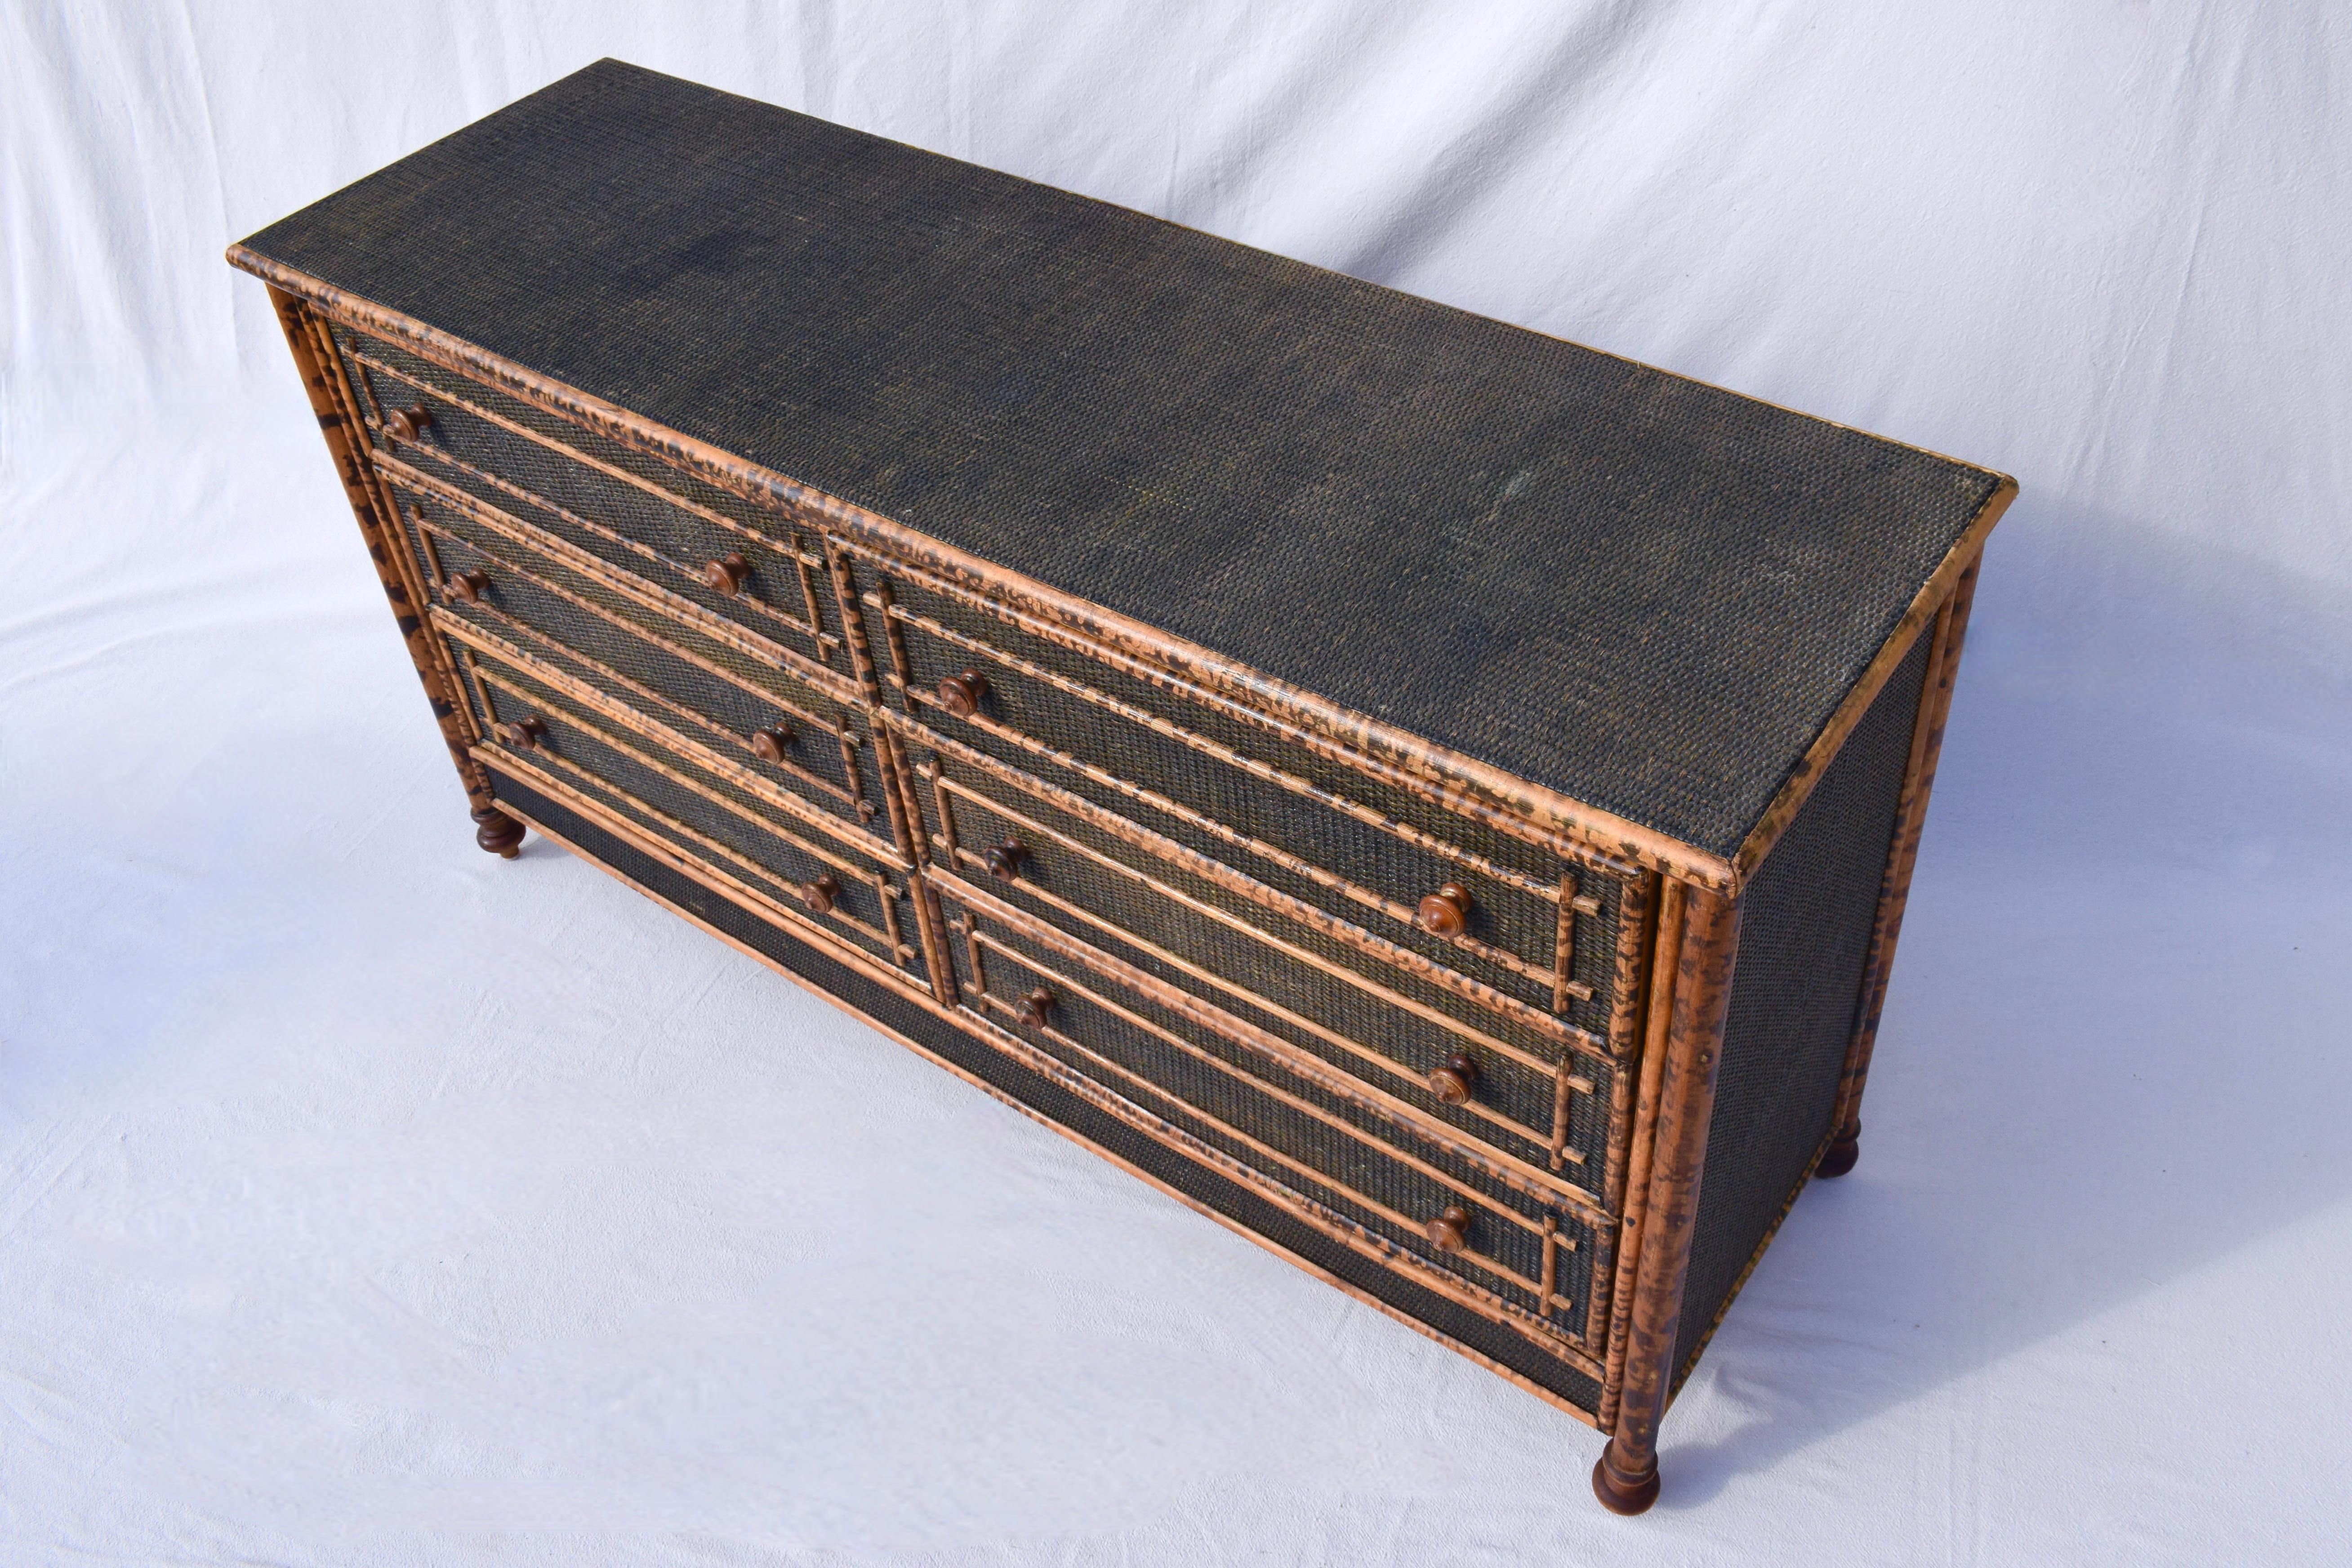 Philippine British Colonial style Tortoise Bamboo Chest of Drawers